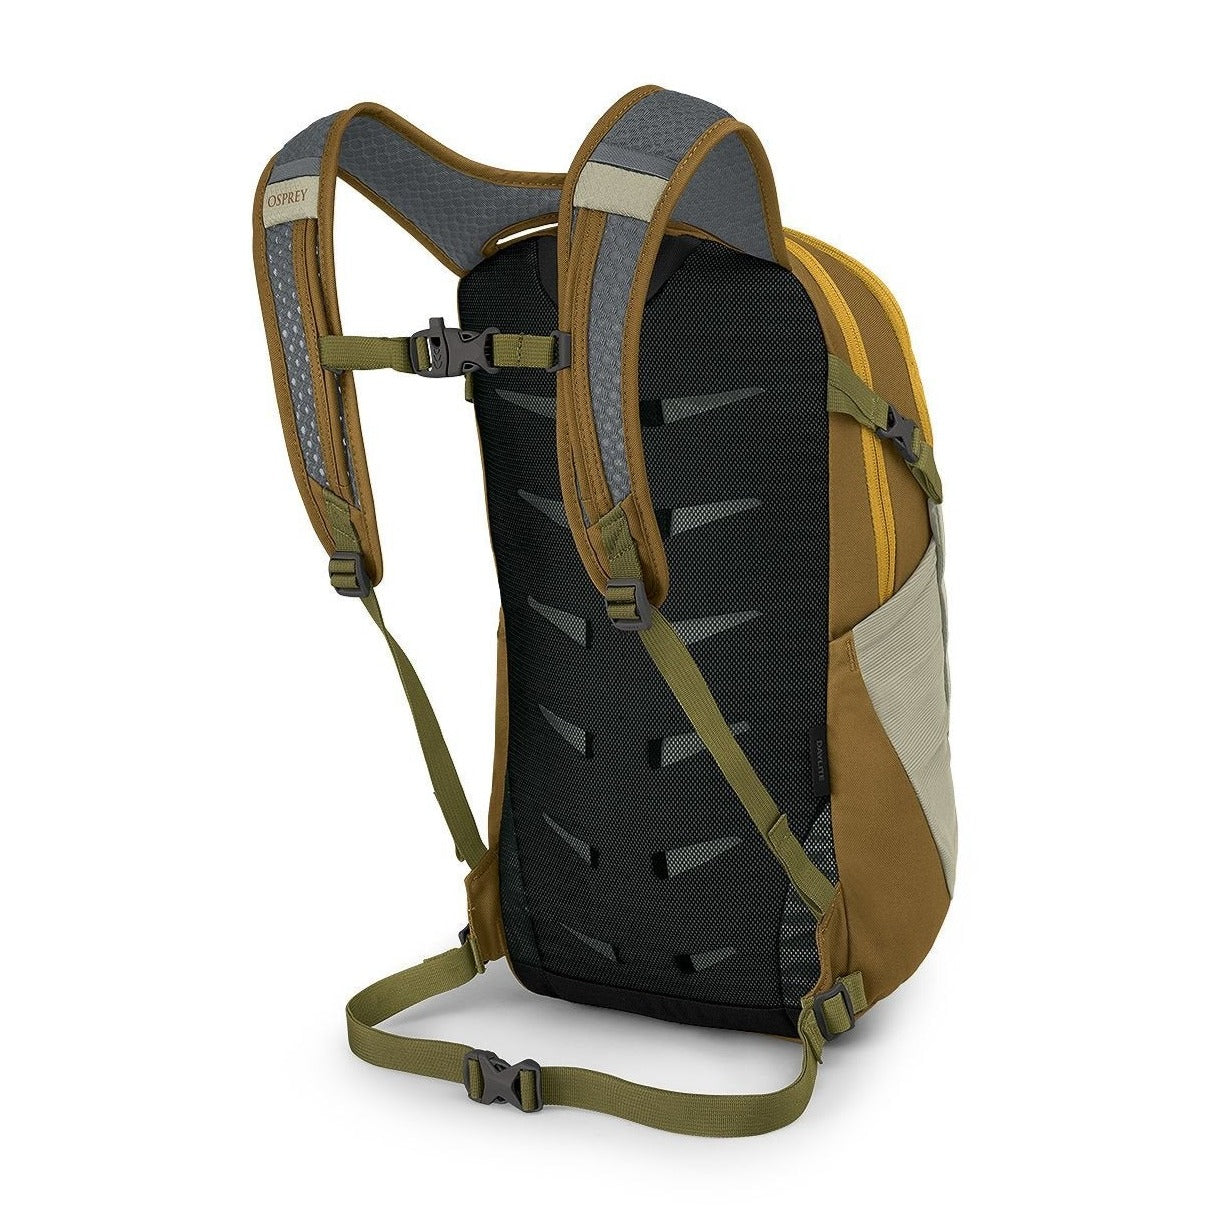 Osprey Packs 09. PACKS|LUGGAGE - PACK|ACTIVE - DAYPACK Daylite MEADOW GRAY|HISTOSOL BROWN O S